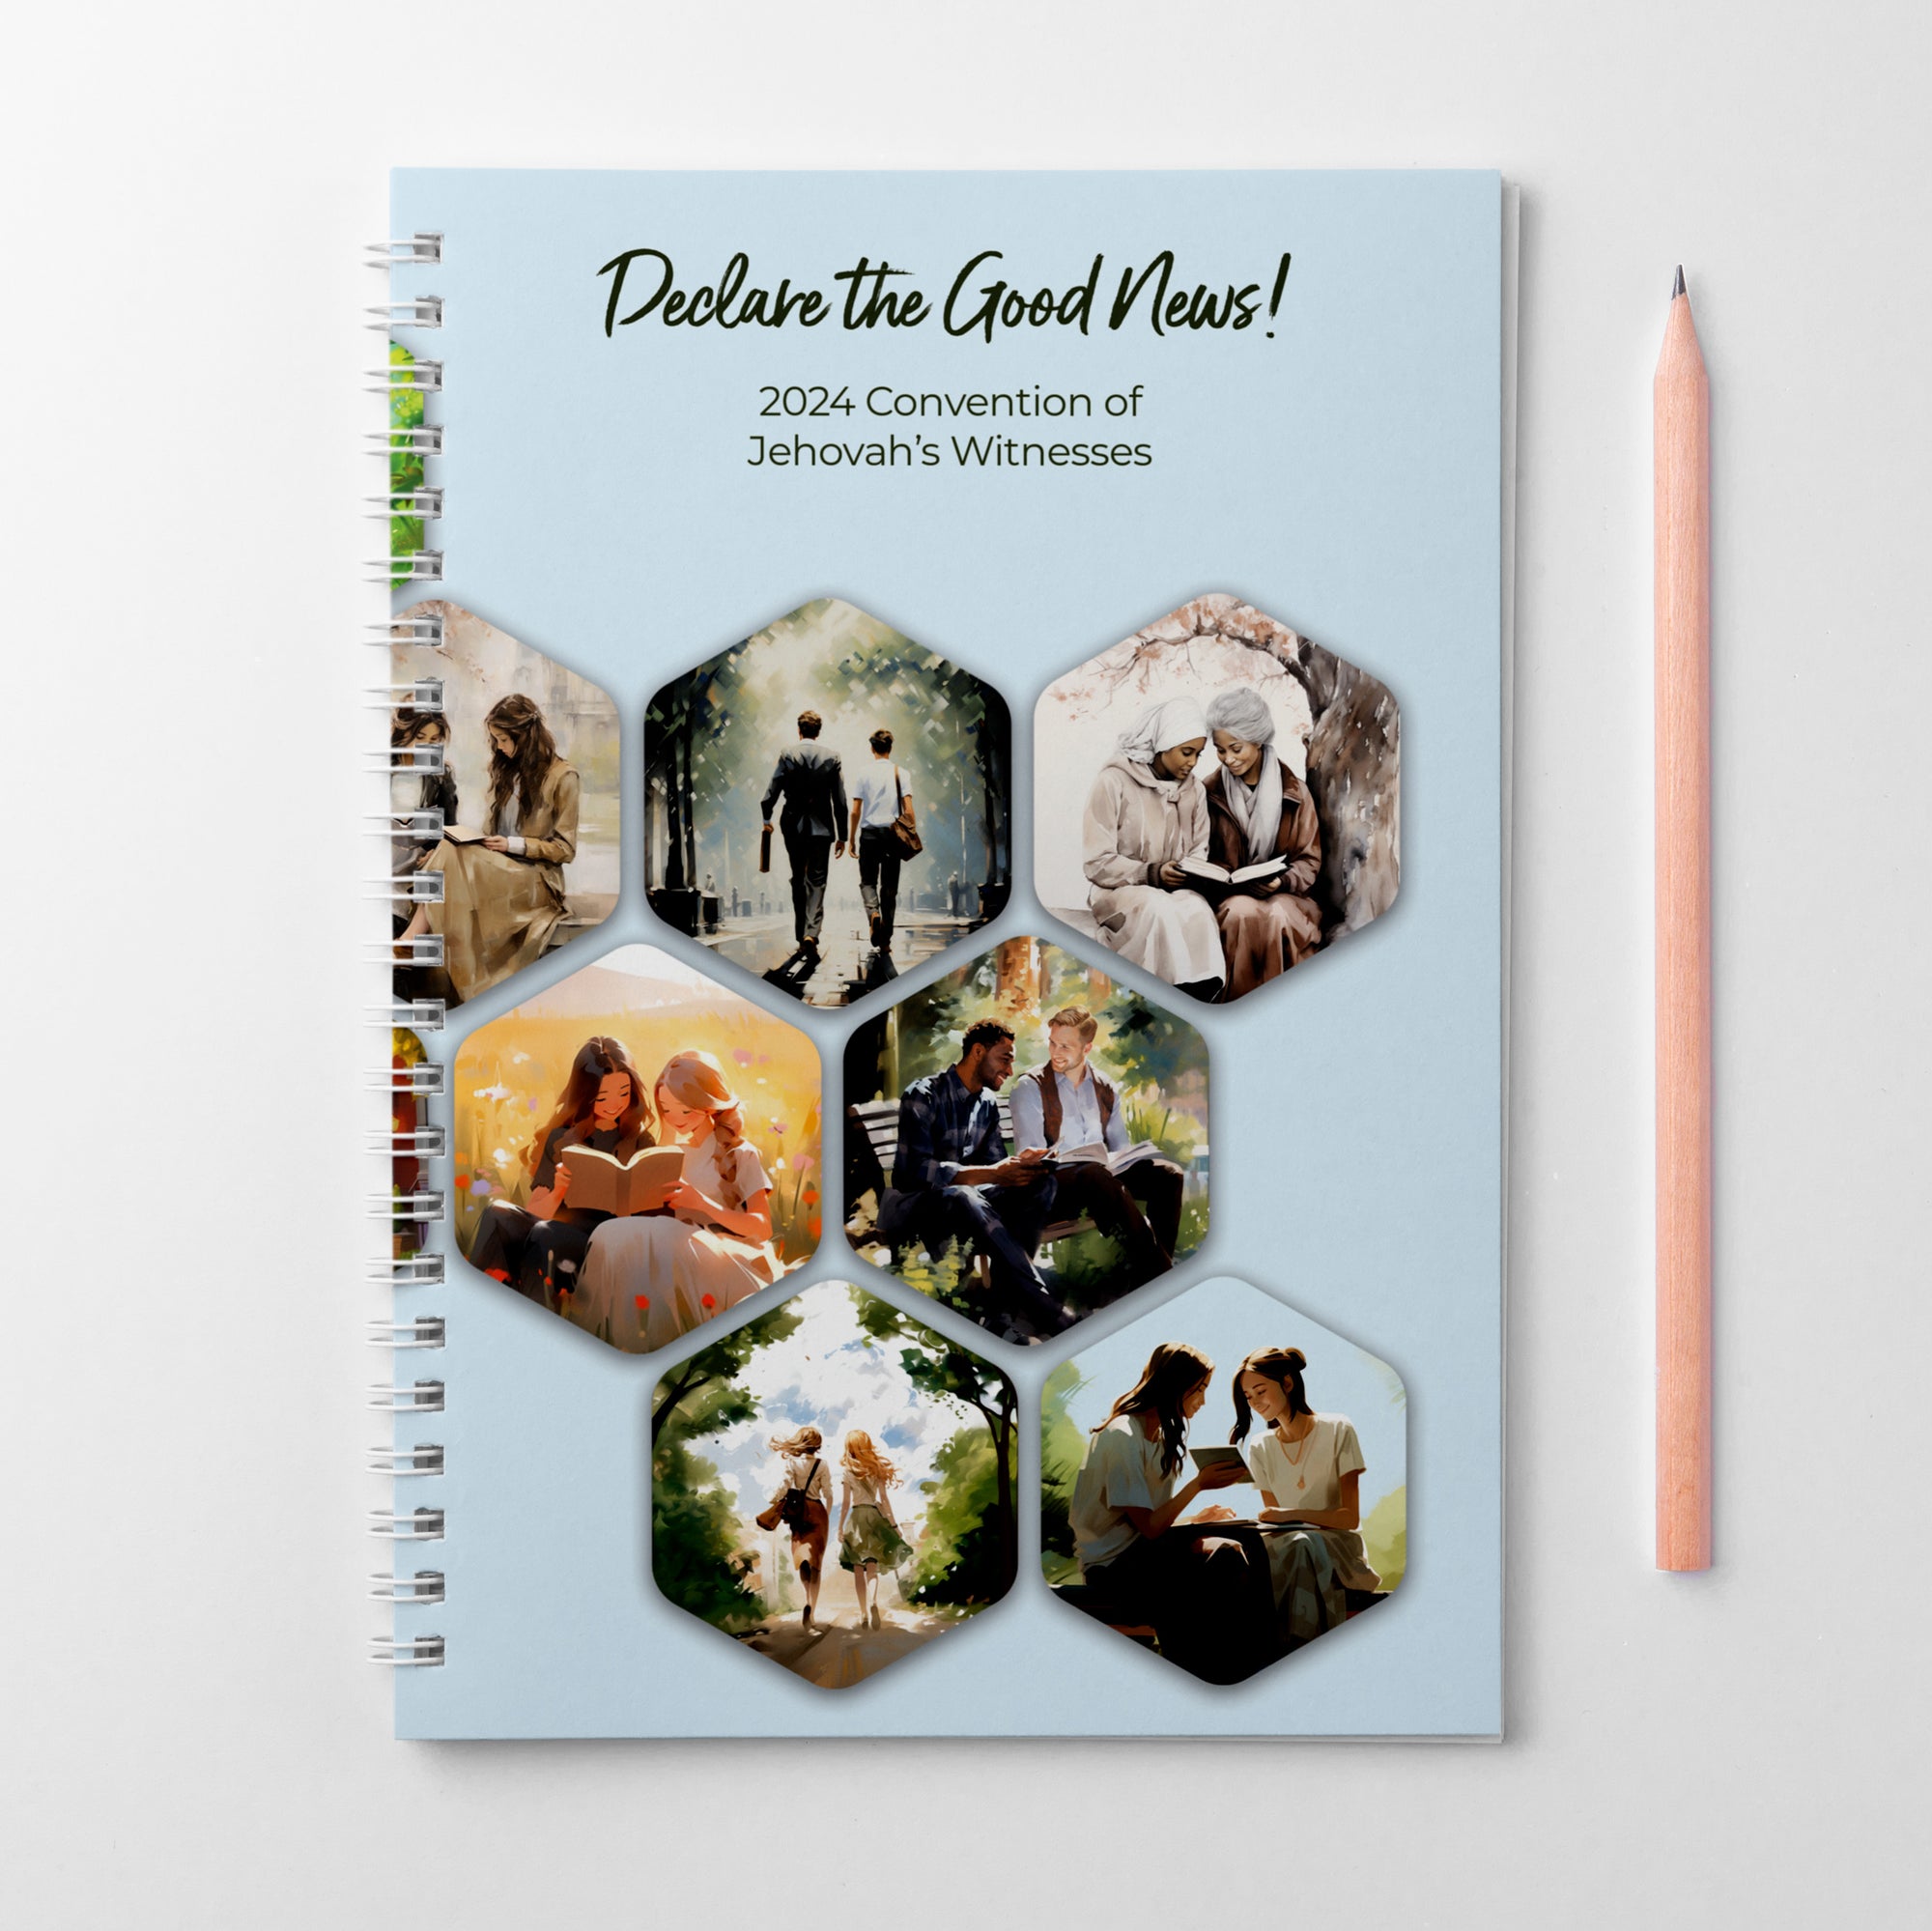 2024 Convention Notebook - Declare the Good News! - Around the world